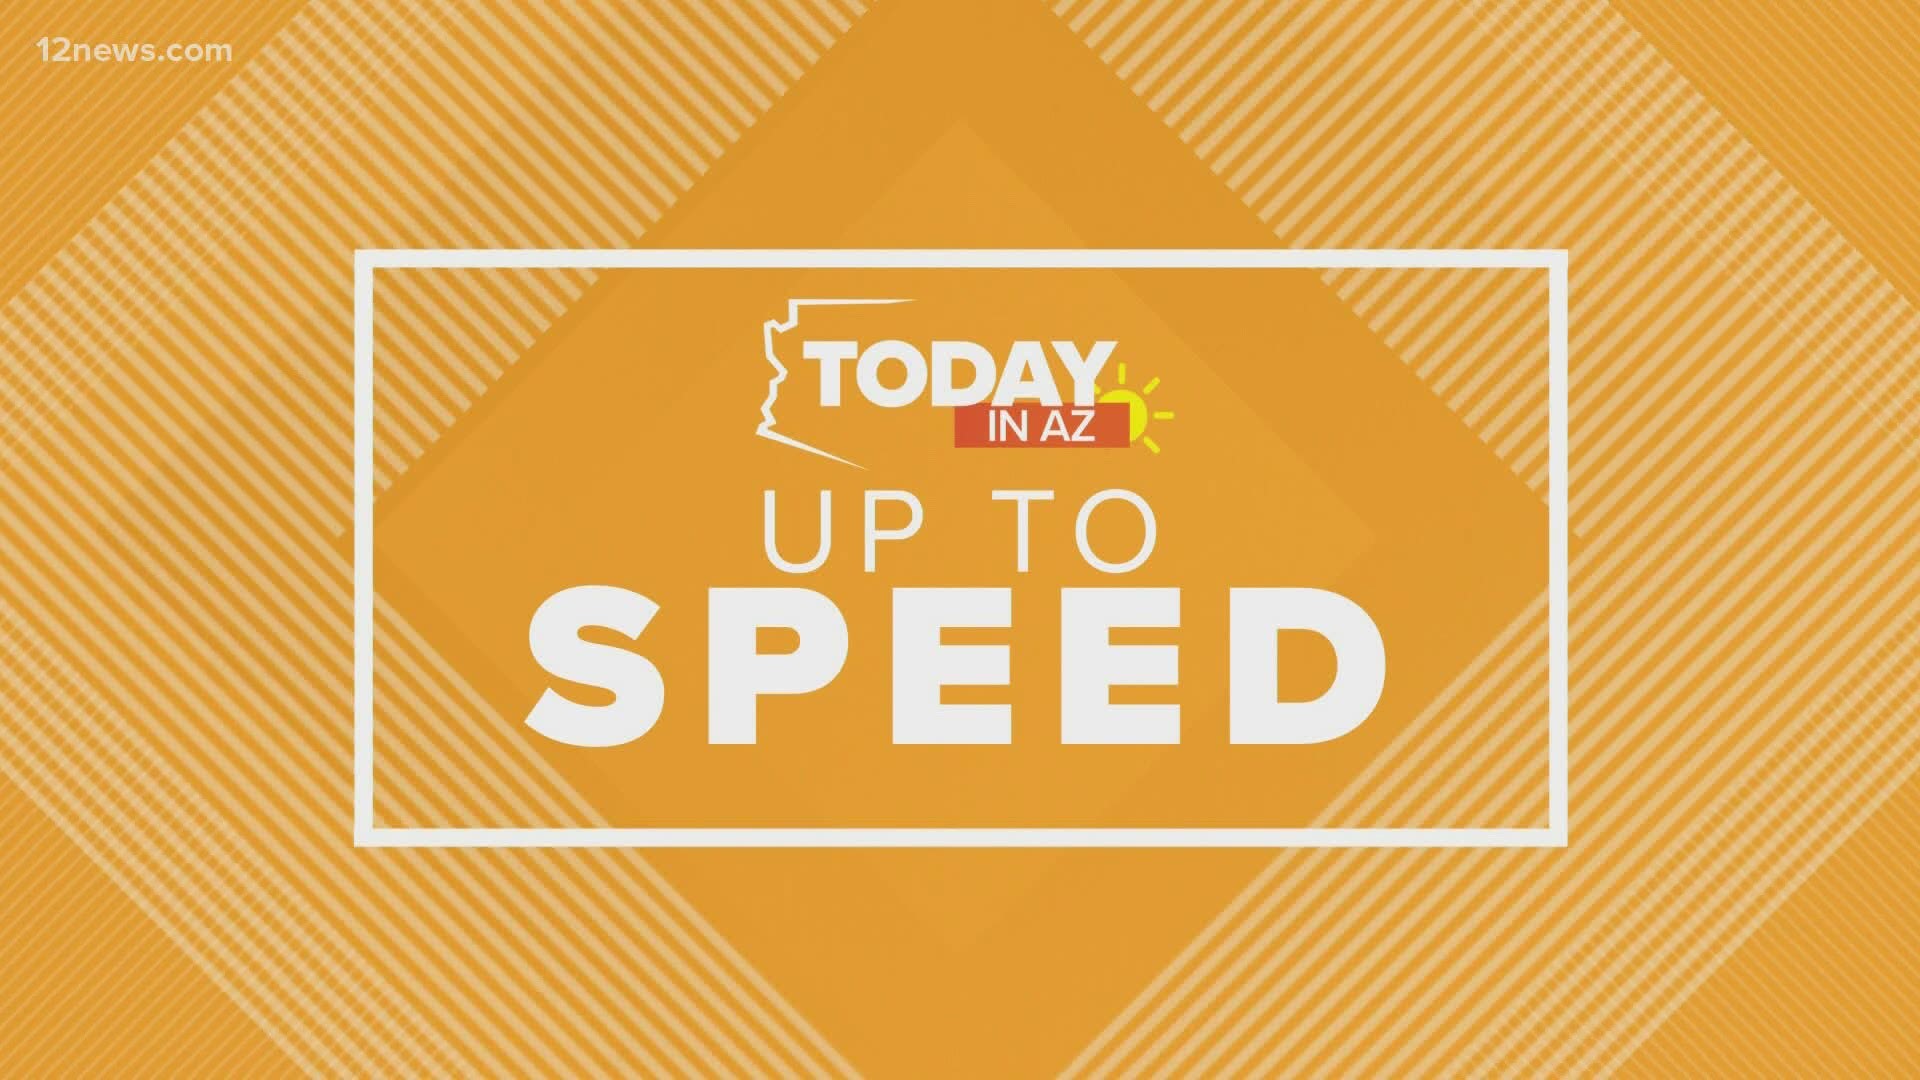 Get 'Up to Speed' Wednesday morning.